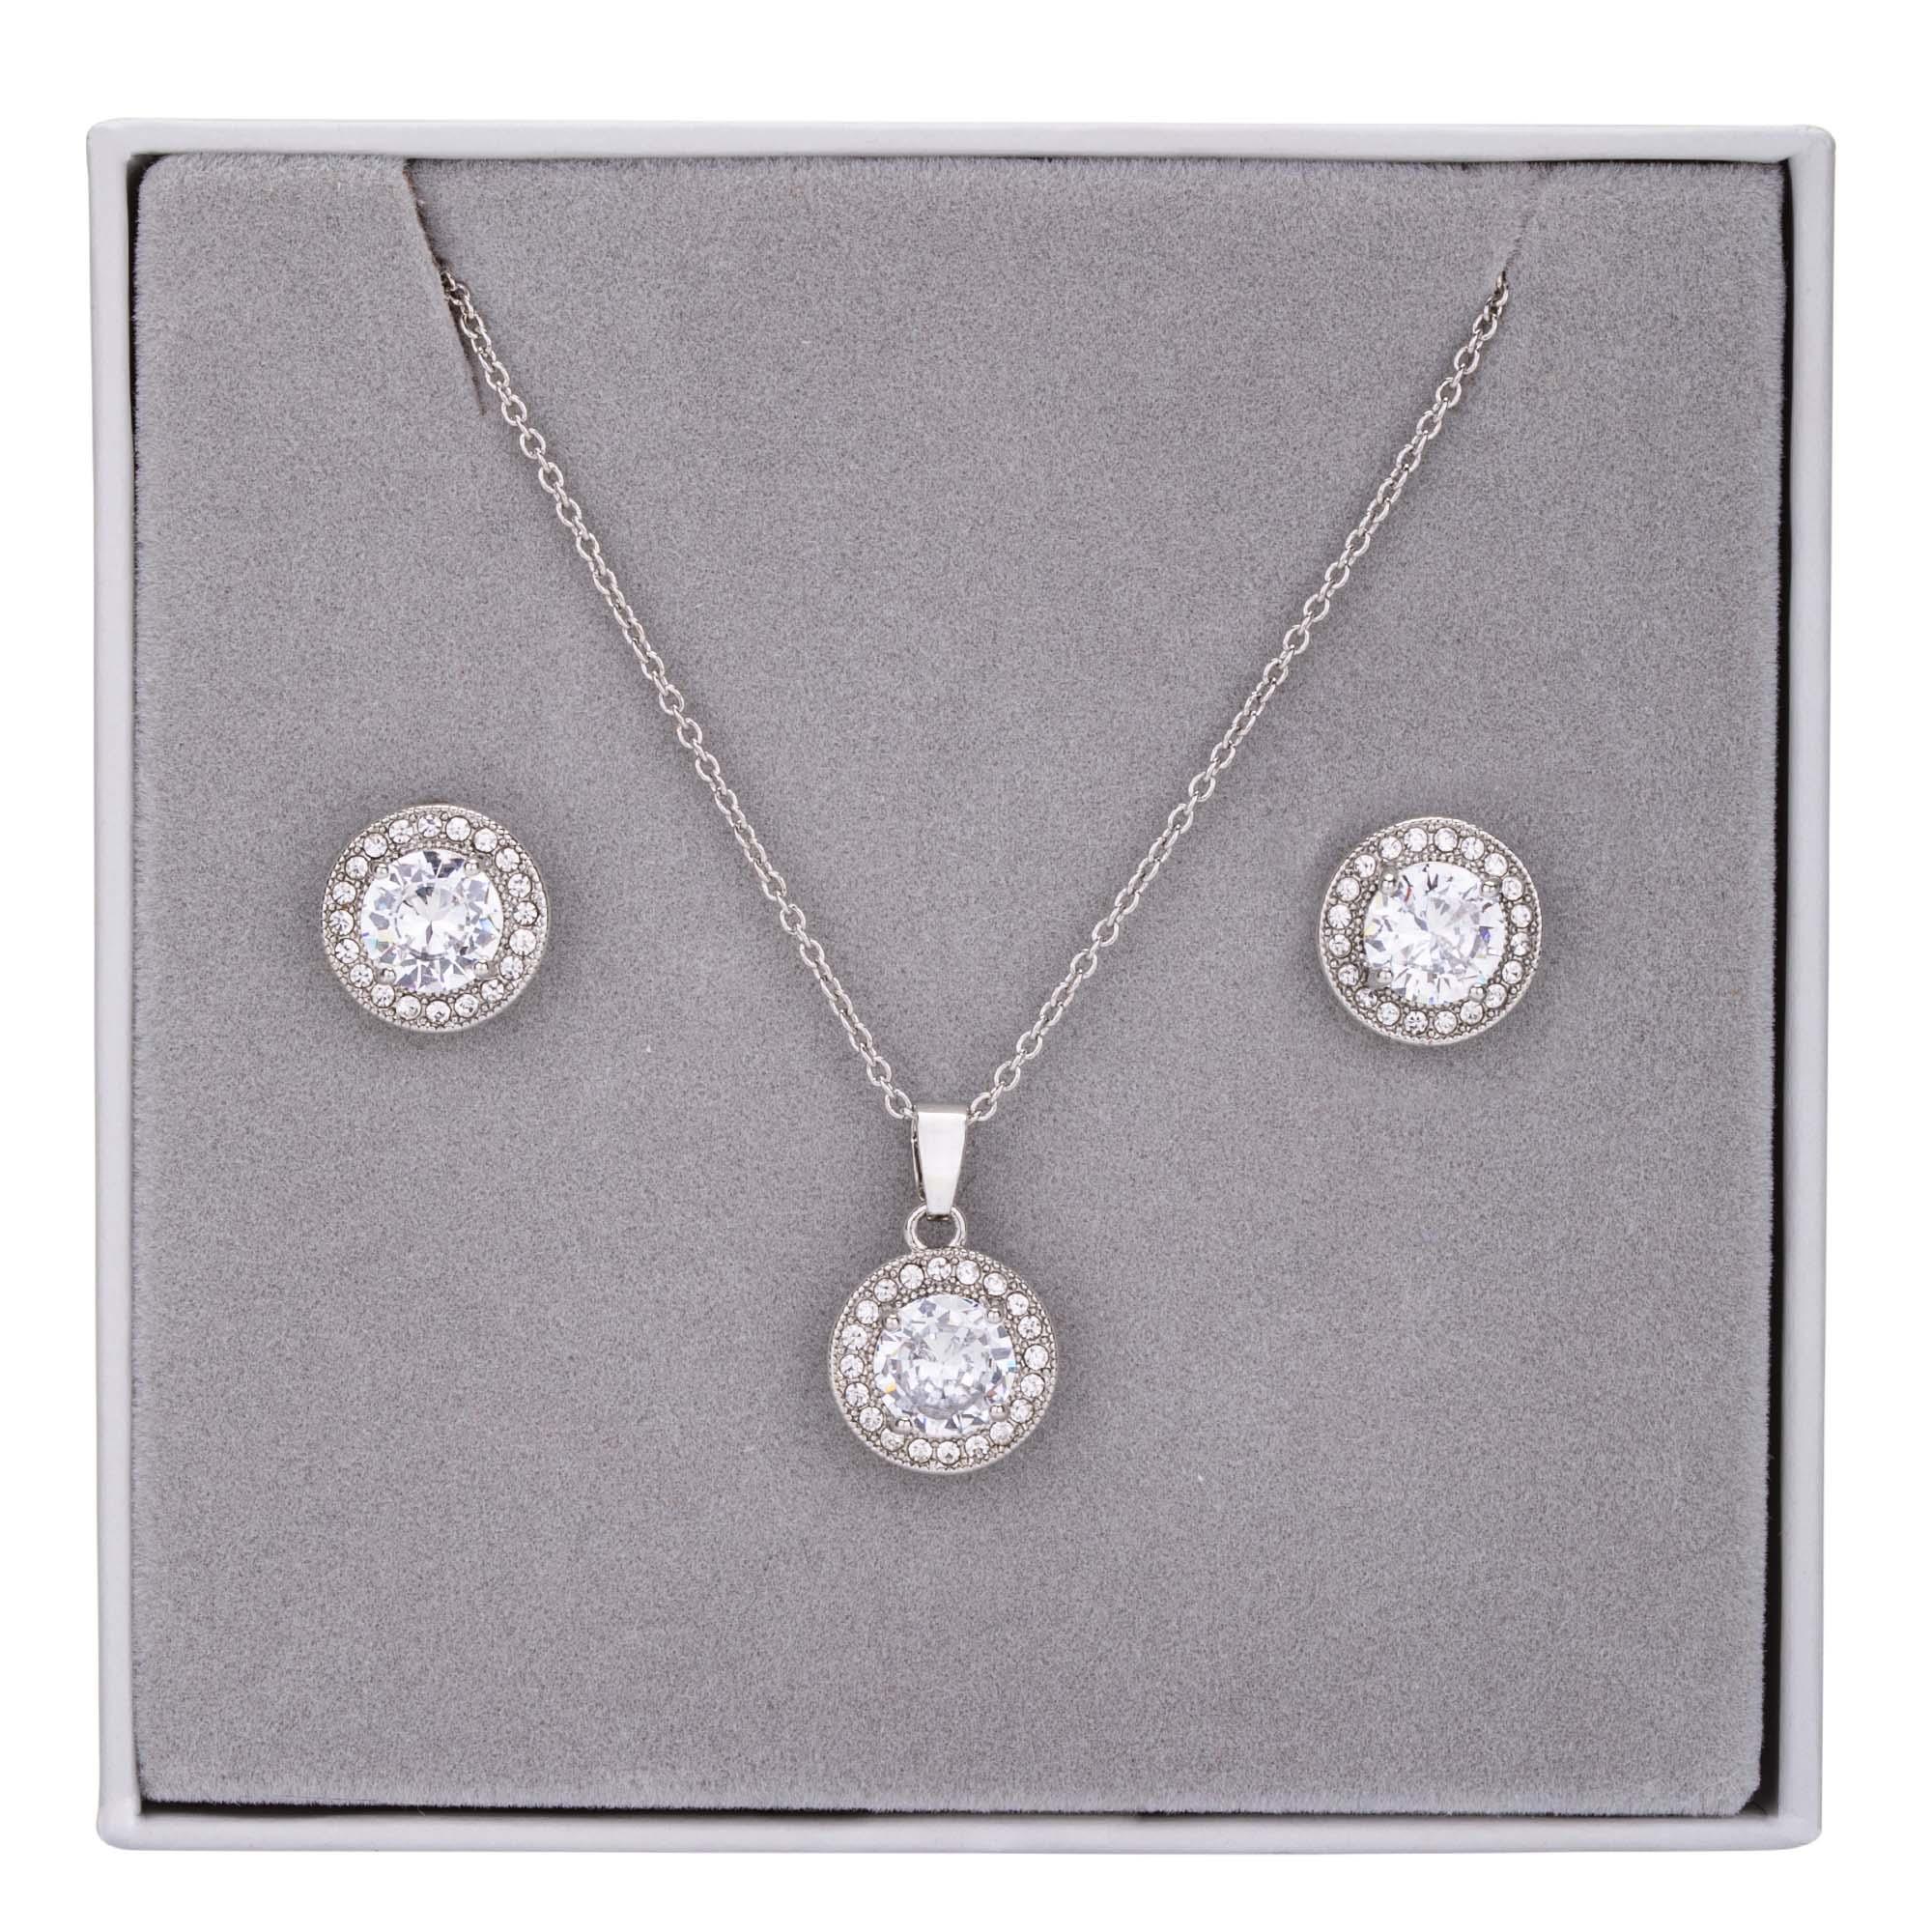 Cubic Zirconia Circle Pendant Necklace & Earrings Boxed Set in Silver - D&X Retail